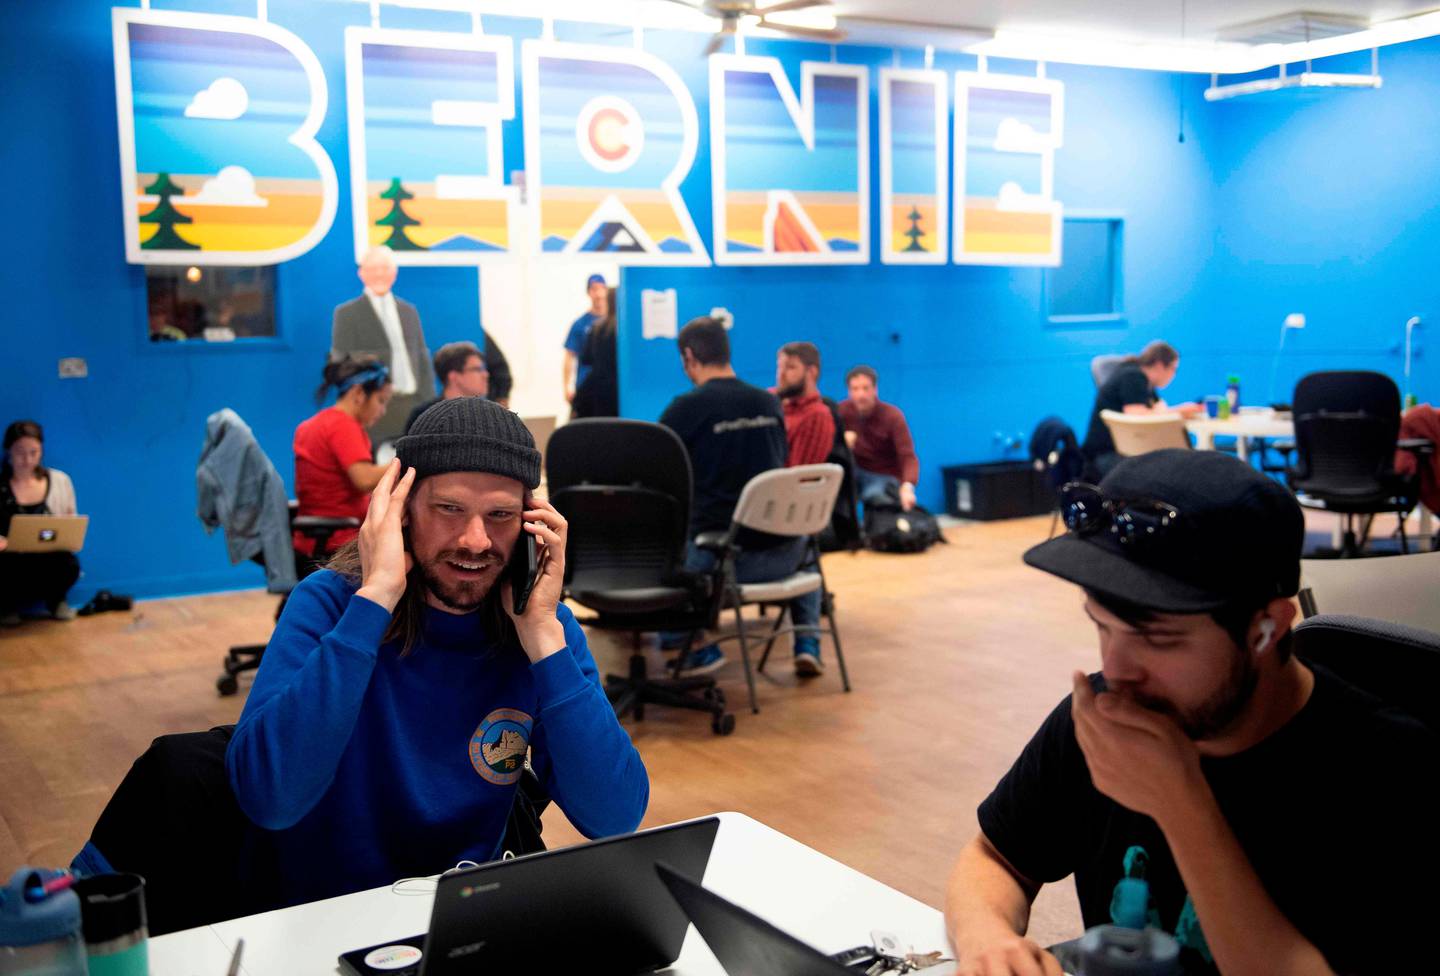 Phone bank volunteers call potential voters from the Colorado campaign office of Democratic presidential candidate Vermont Senator Bernie Sanders on Super Tuesday, March 3, 2020 in Denver, Colorado. - Fourteen states and American Samoa are holding presidential primary elections, with over 1400 delegates at stake. Americans vote Tuesday in primaries that play a major role in who will challenge Donald Trump for the presidency, a day after key endorsements dramatically boosted Joe Biden's hopes against surging leftist Bernie Sanders. The backing of Biden by three of his ex-rivals marked an unprecedented turn in a fractured, often bitter campaign. (Photo by Jason Connolly / AFP)